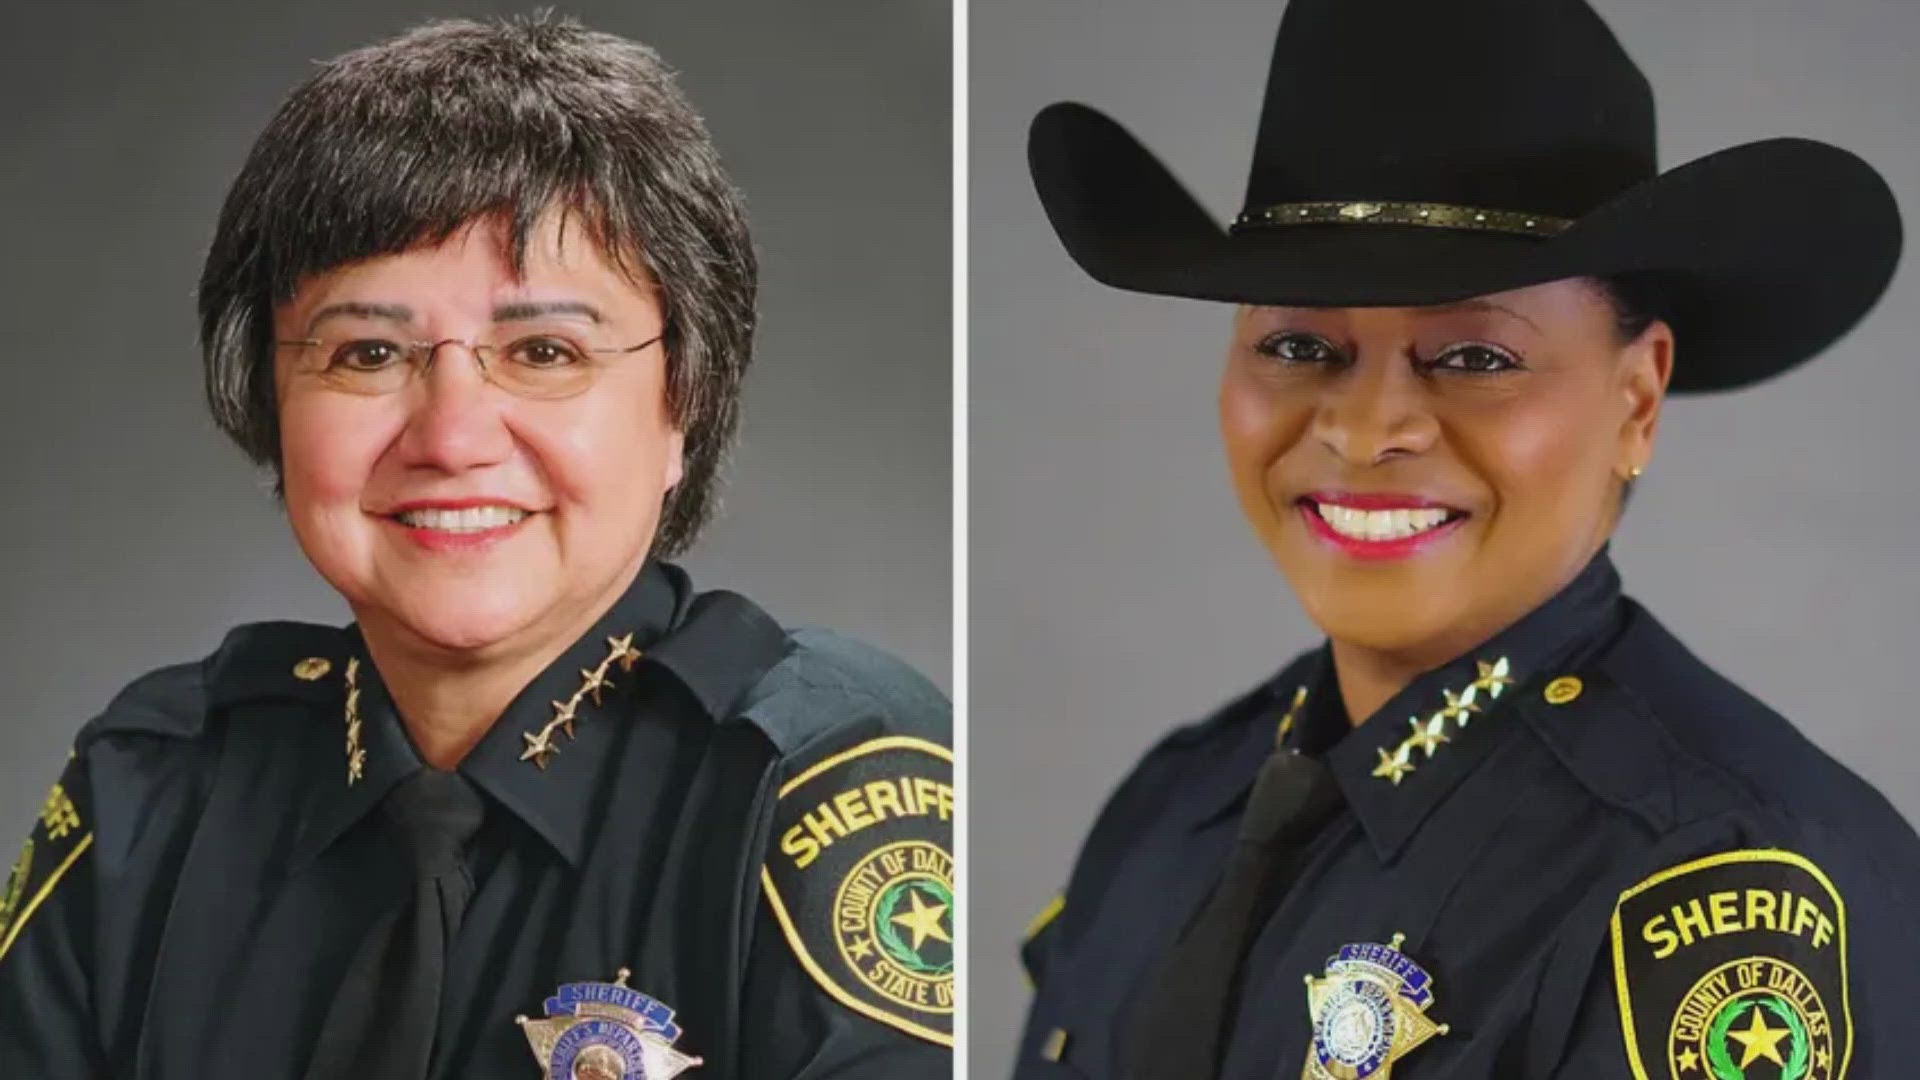 One of the key runoff races for Dallas voters is the election for the Democratic candidate for Dallas County Sheriff, who will run unopposed in November.